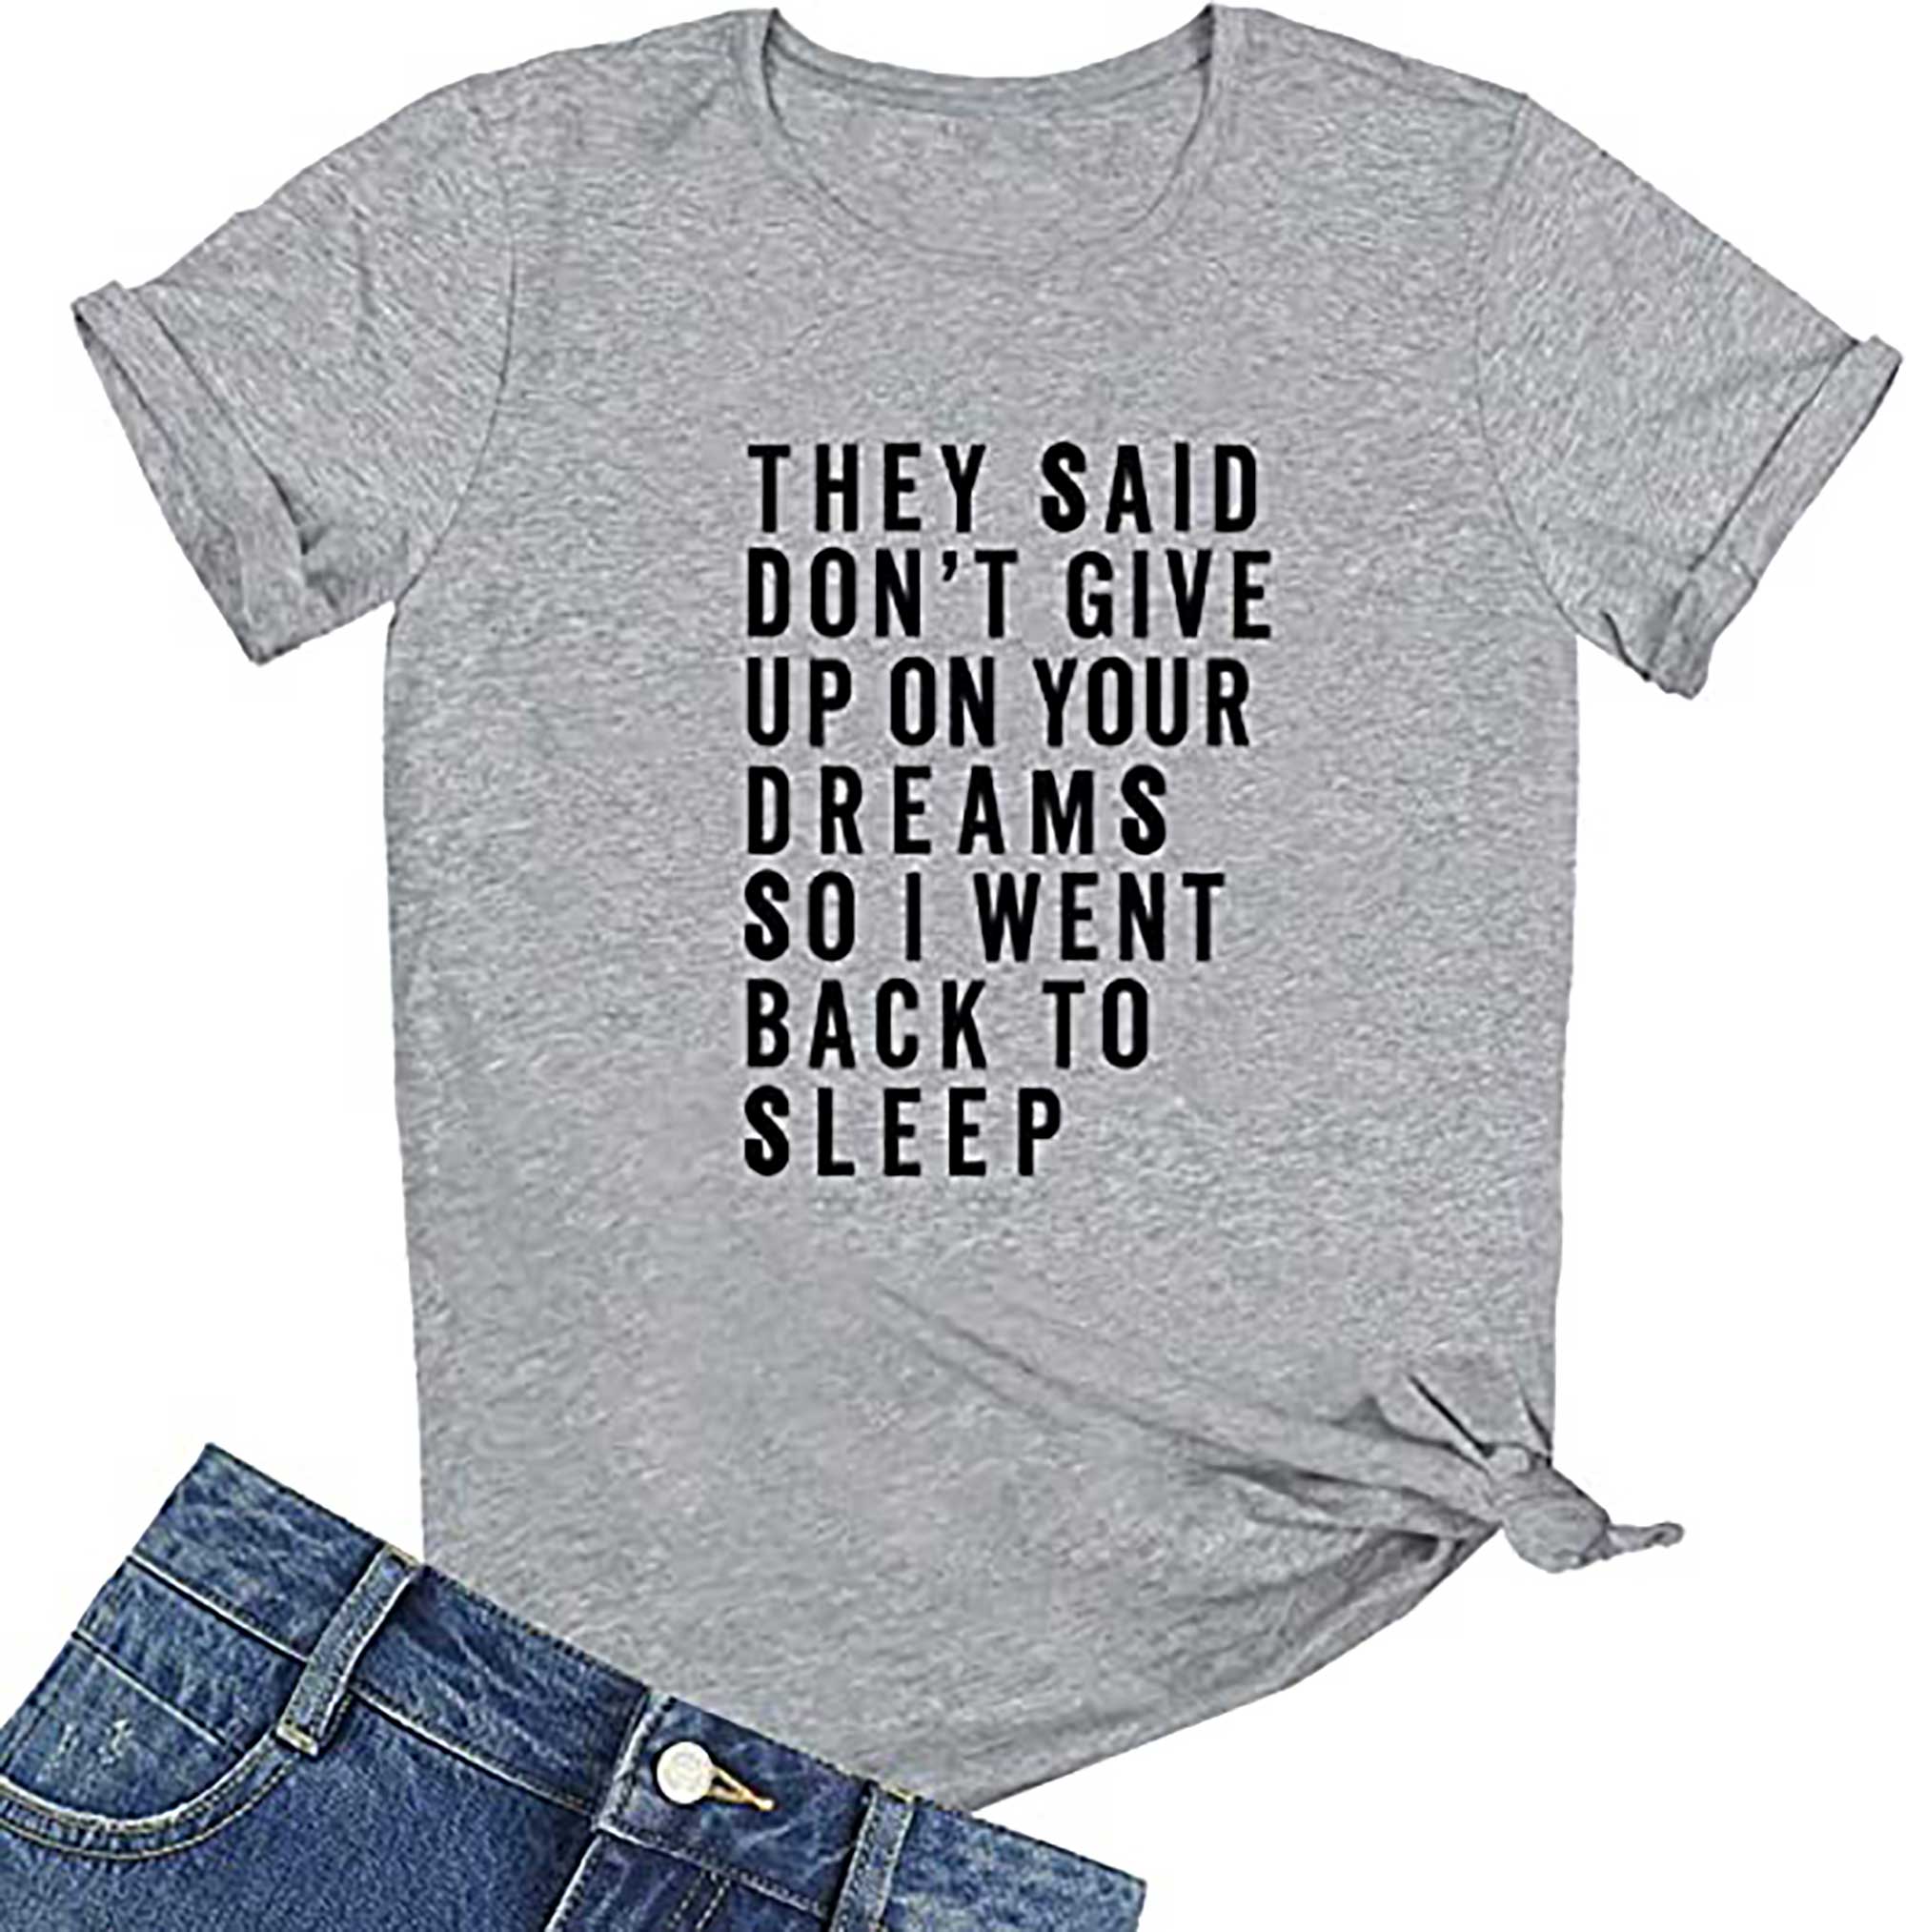 Skitongift They Said Dont Give Up On Your Dreams So I Went Back To Sleep Grahpic Letter tee Shirt Fashion